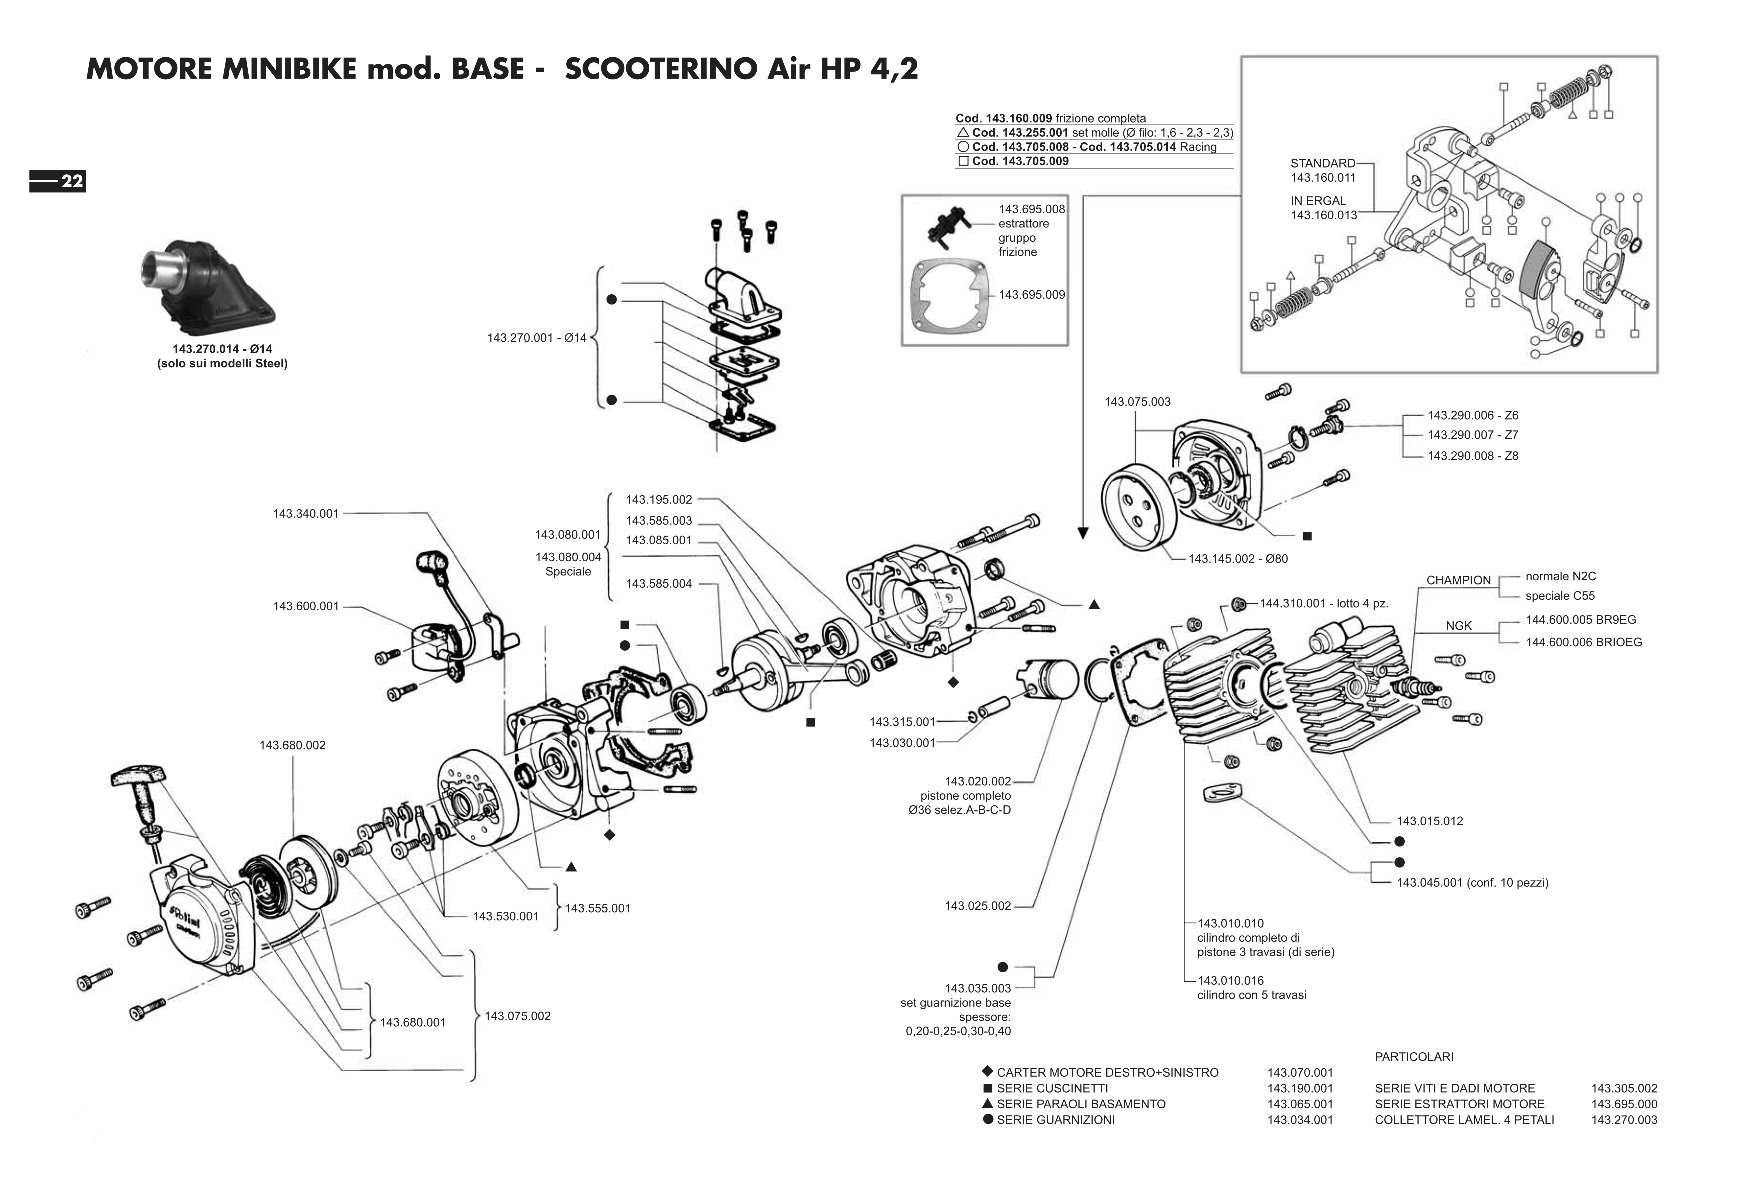 Exploded view Motor (HP 4,2)